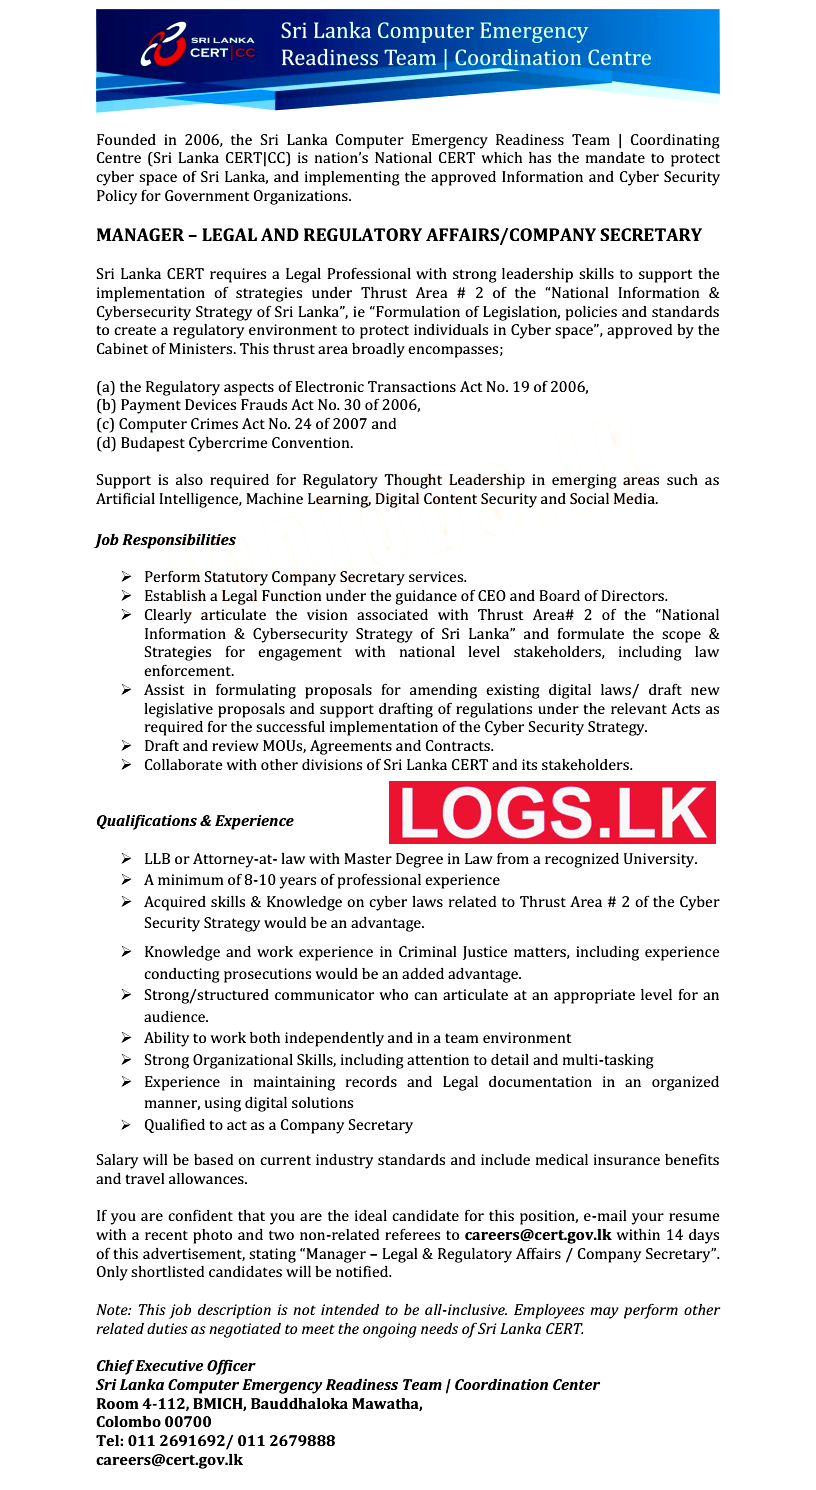 Manager - Sri Lanka Computer Emergency Readiness Team Vacancies 2023 Application Form, Details Download